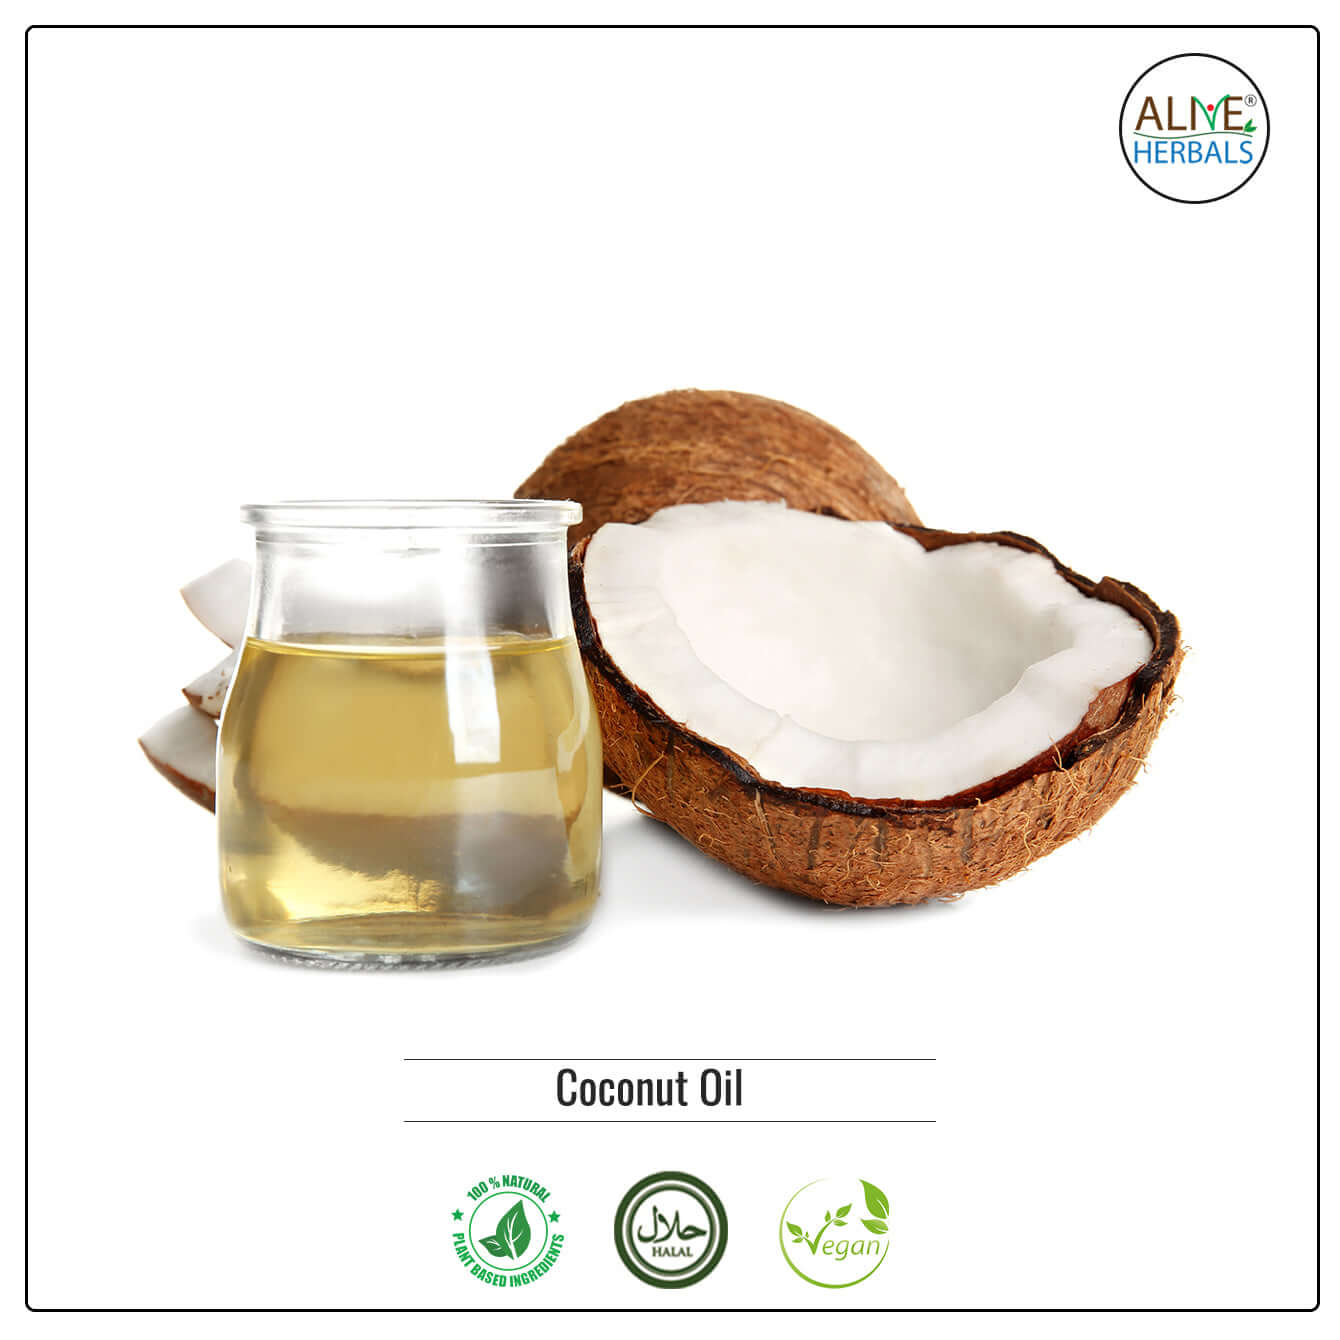 Coconut Oil - Shop at Natural Food Store | Alive Herbals.